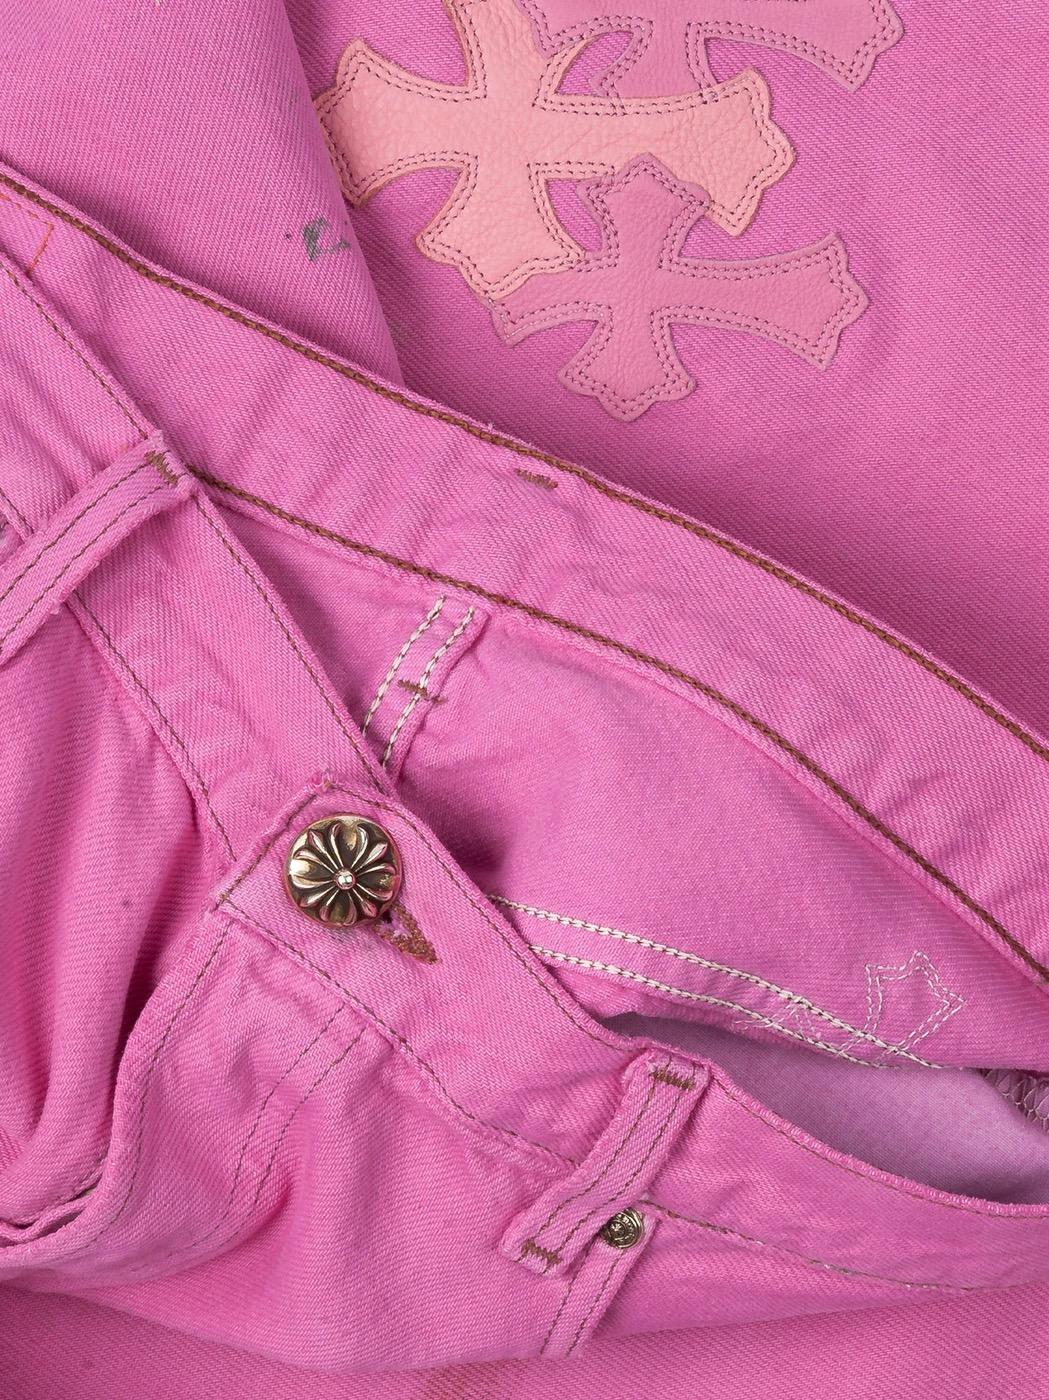 chrome heart jeans pink